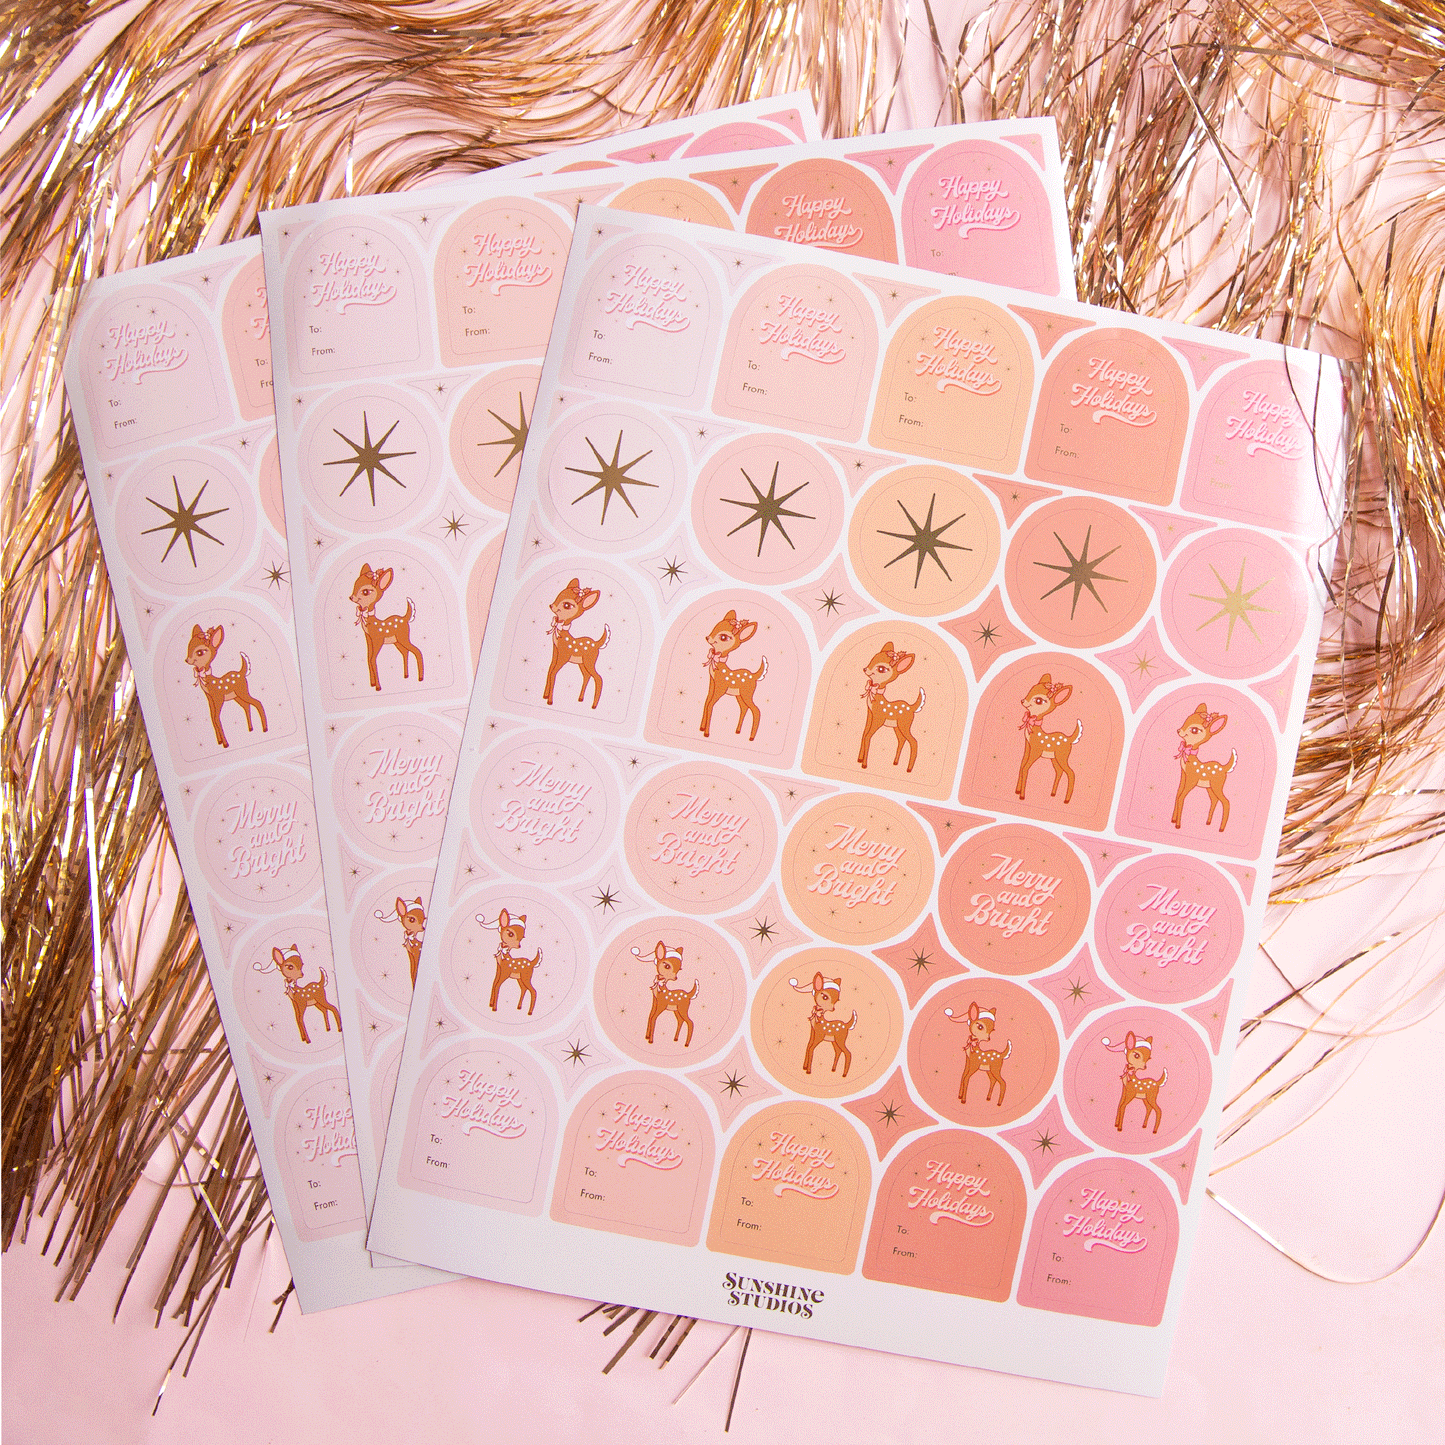 On a pink background is three sheets of gift label stickers with shapes of circles and arches along with text that reads, "Happy Holidays", a gold star, or a retro deer graphic.